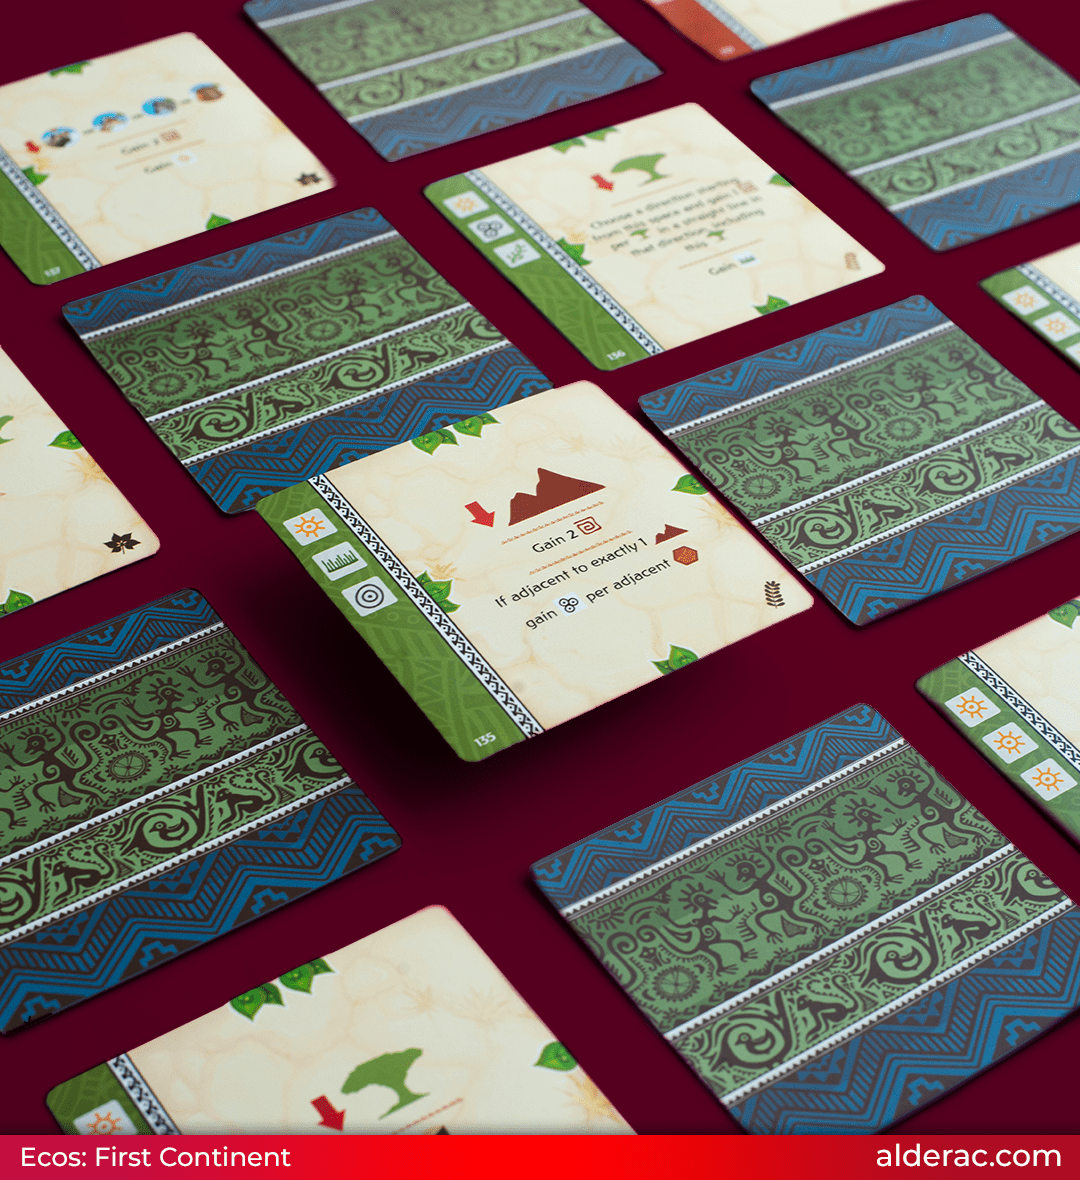 Ecos action cards spread over a burgundy background